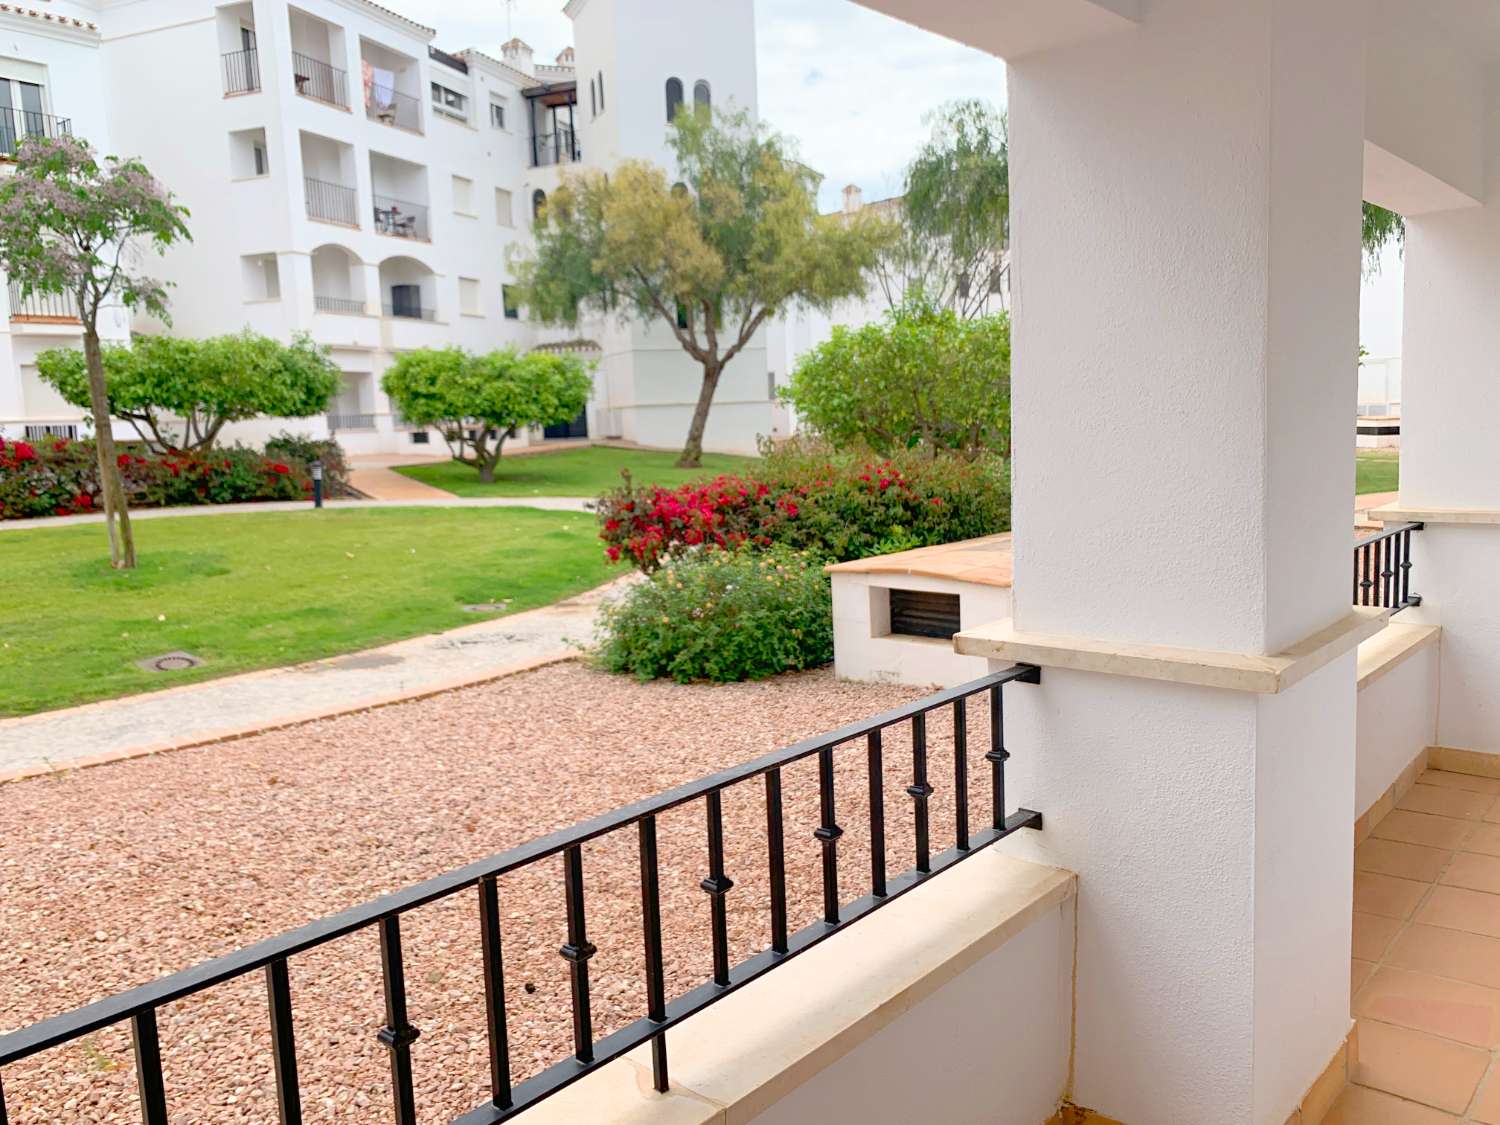 Discover the tranquility of living at La Torre Golf Resort, Murcia!